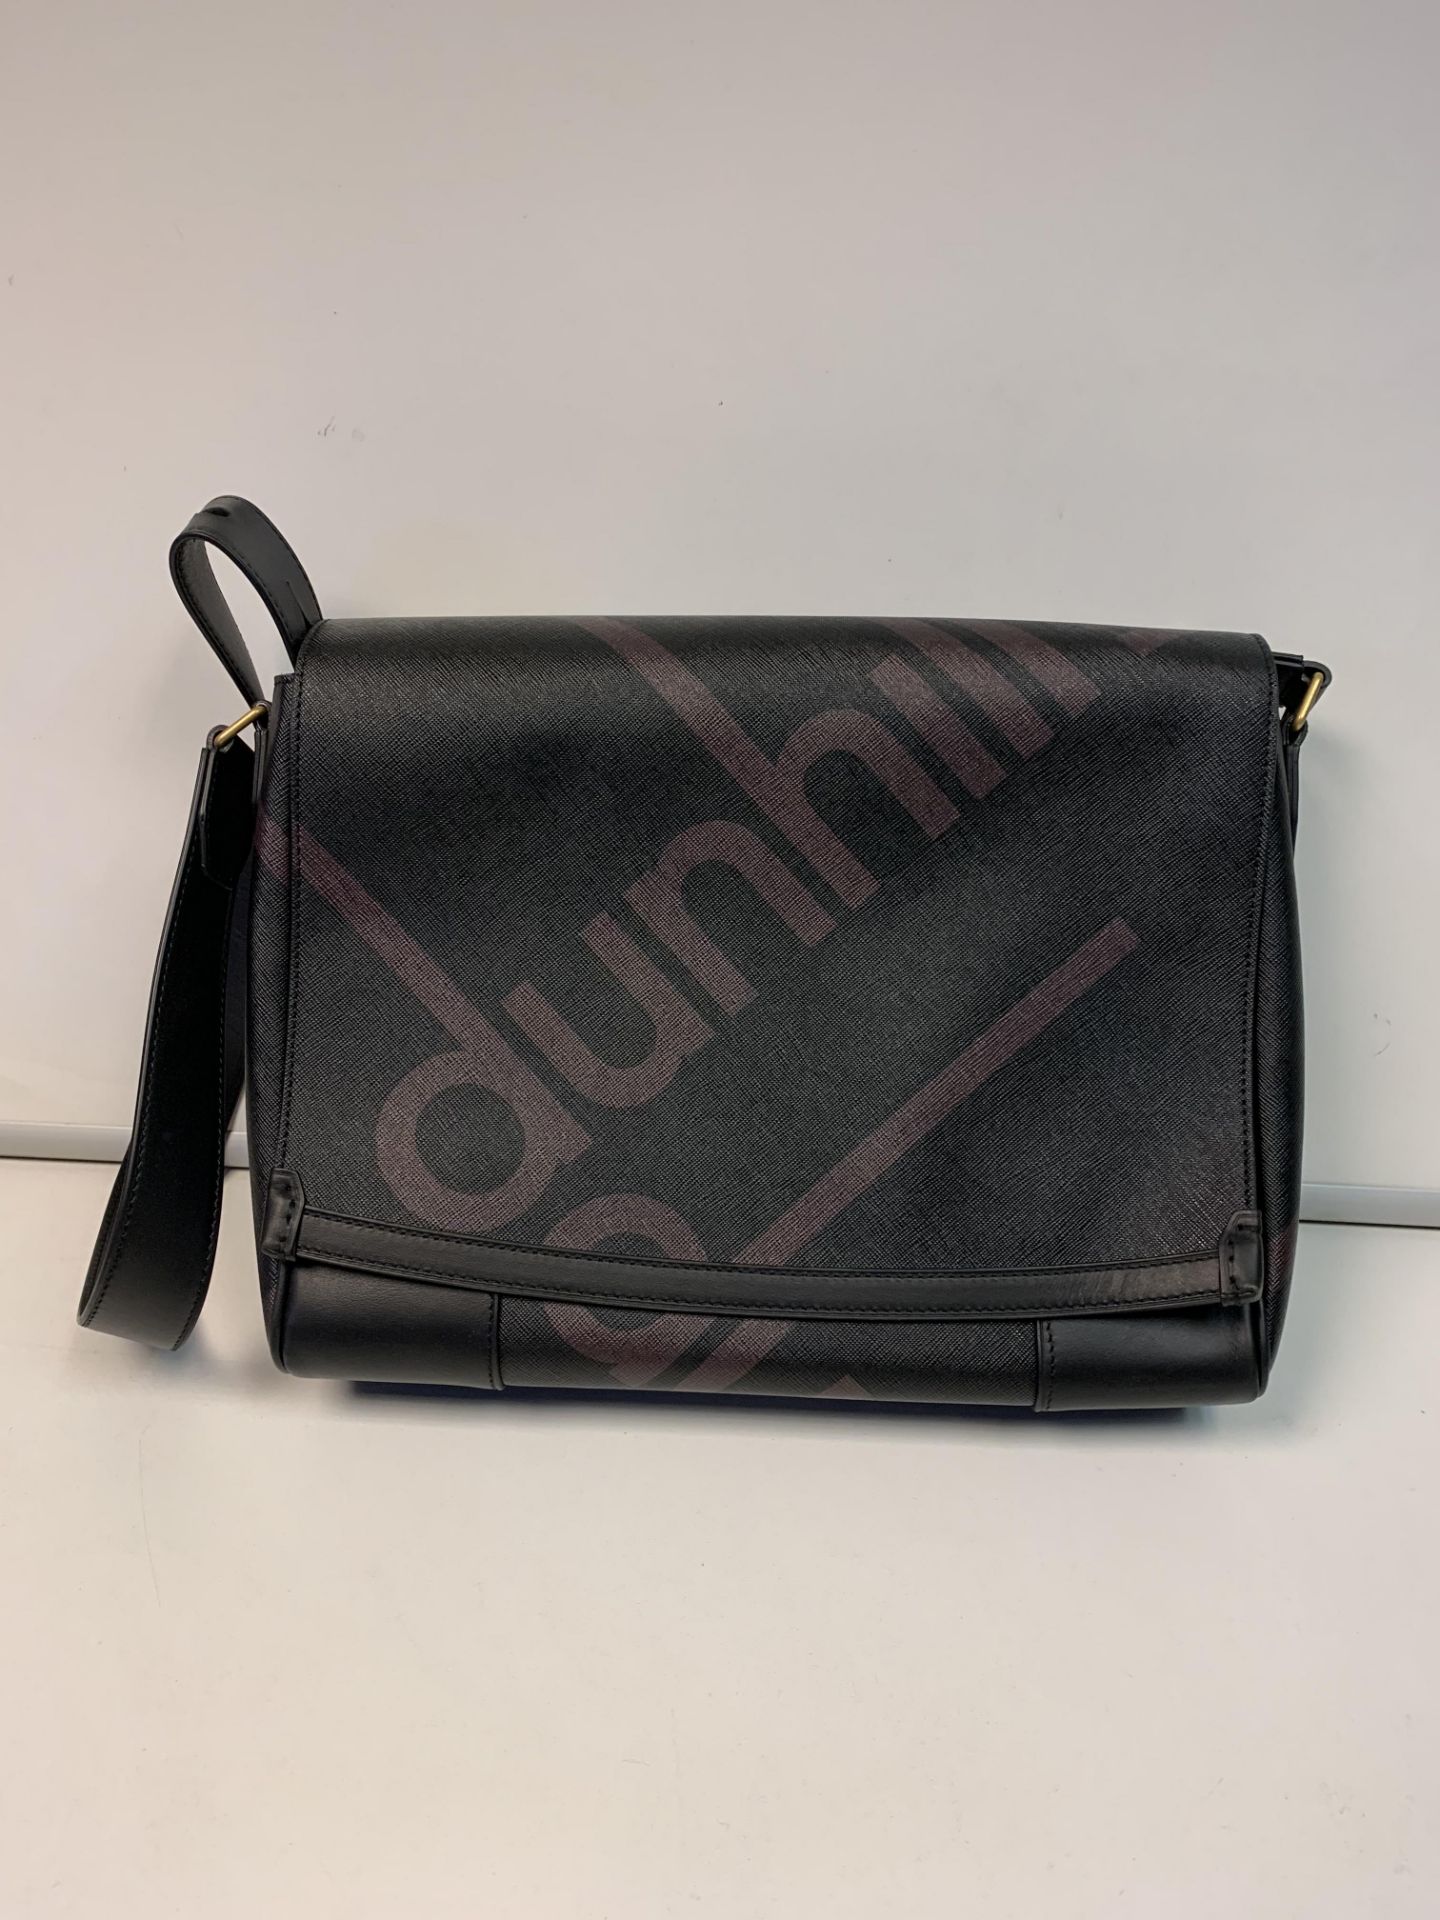 BRAND NEW ALFRED DUNHILL Dunh Gt L Canvas Messenger, BLK (720) RRP £1050 - 1